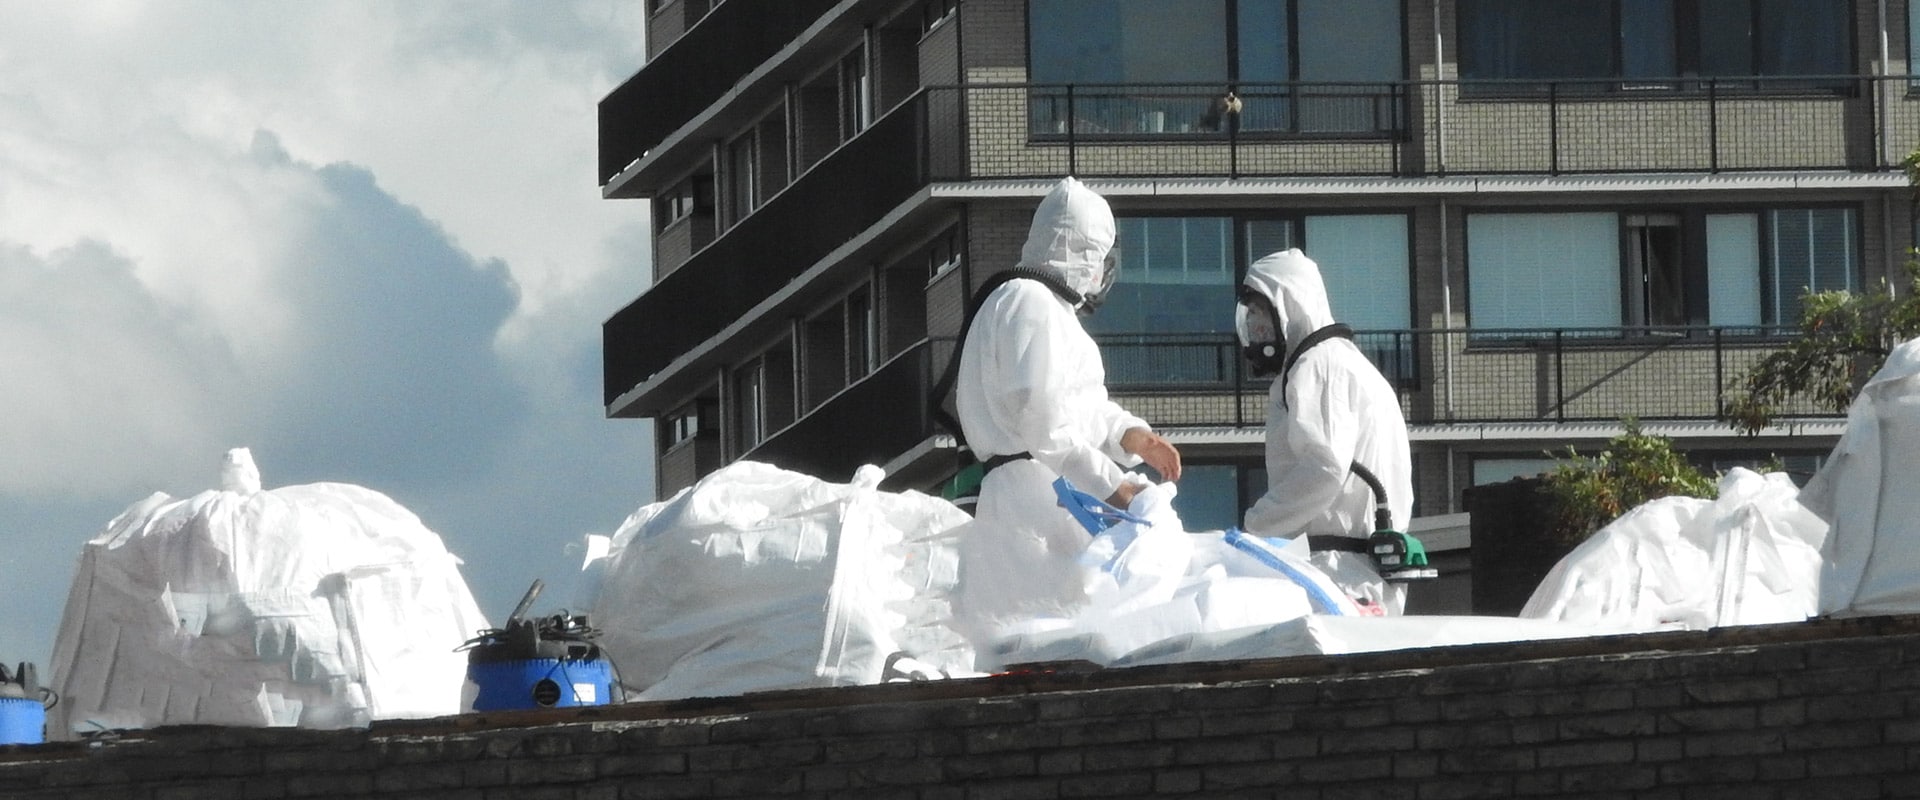 Two Asbestos removal technicians wearing personal protective equipment (PPE) and bagging up asbestos on a commericial site.